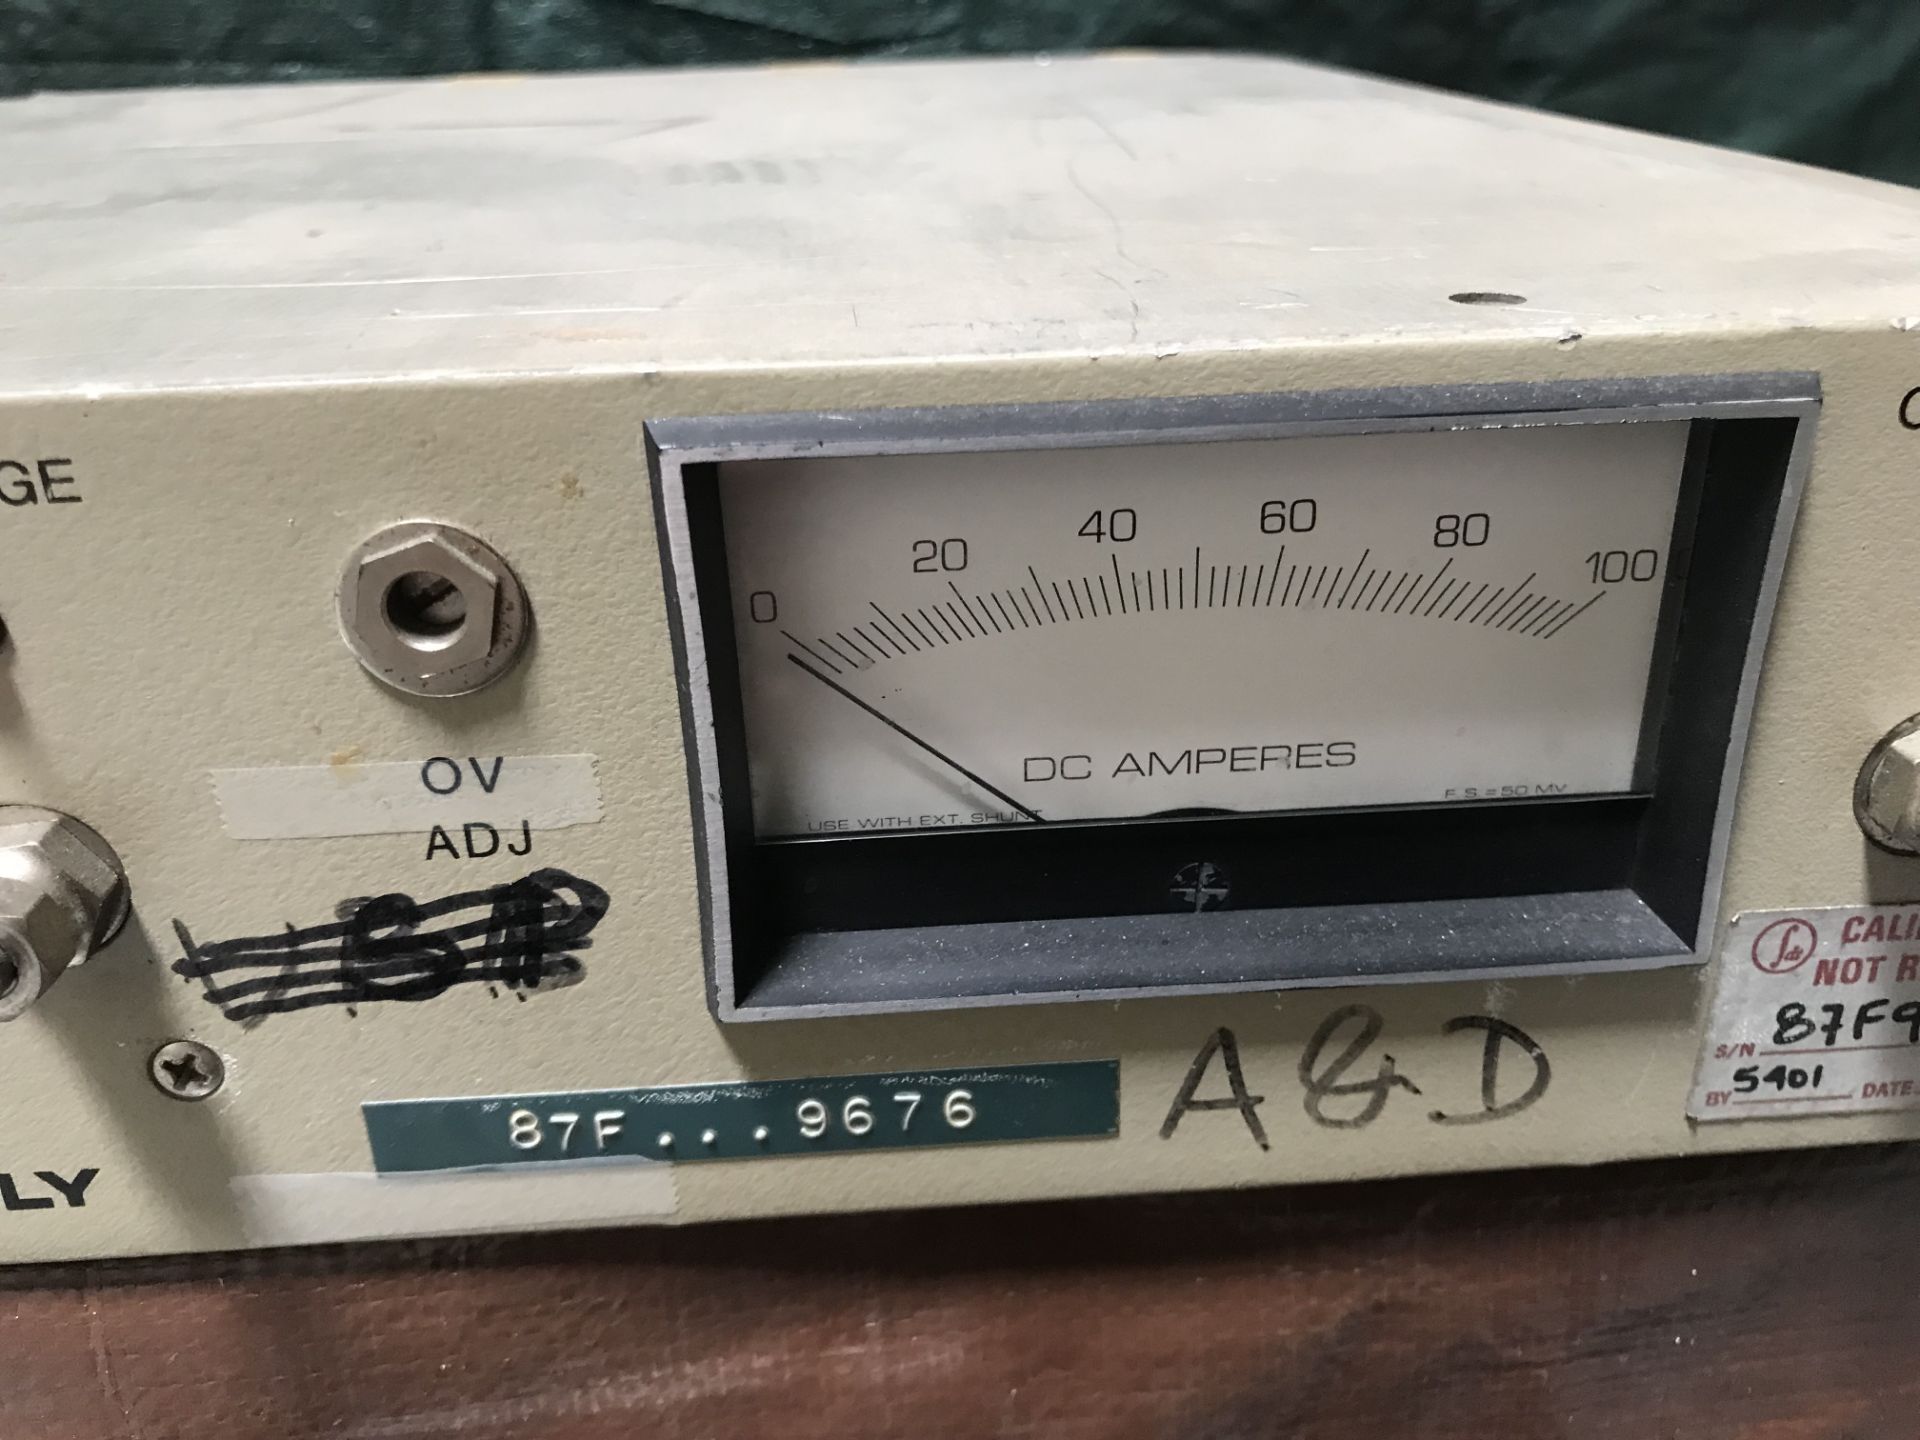 #078 Elctronic Measurments, Inc. TCR 10S90-2-0480-0V-LB, SN: 87F-9676, Input: 190-250VRMS 50/60Hz, O - Image 3 of 8